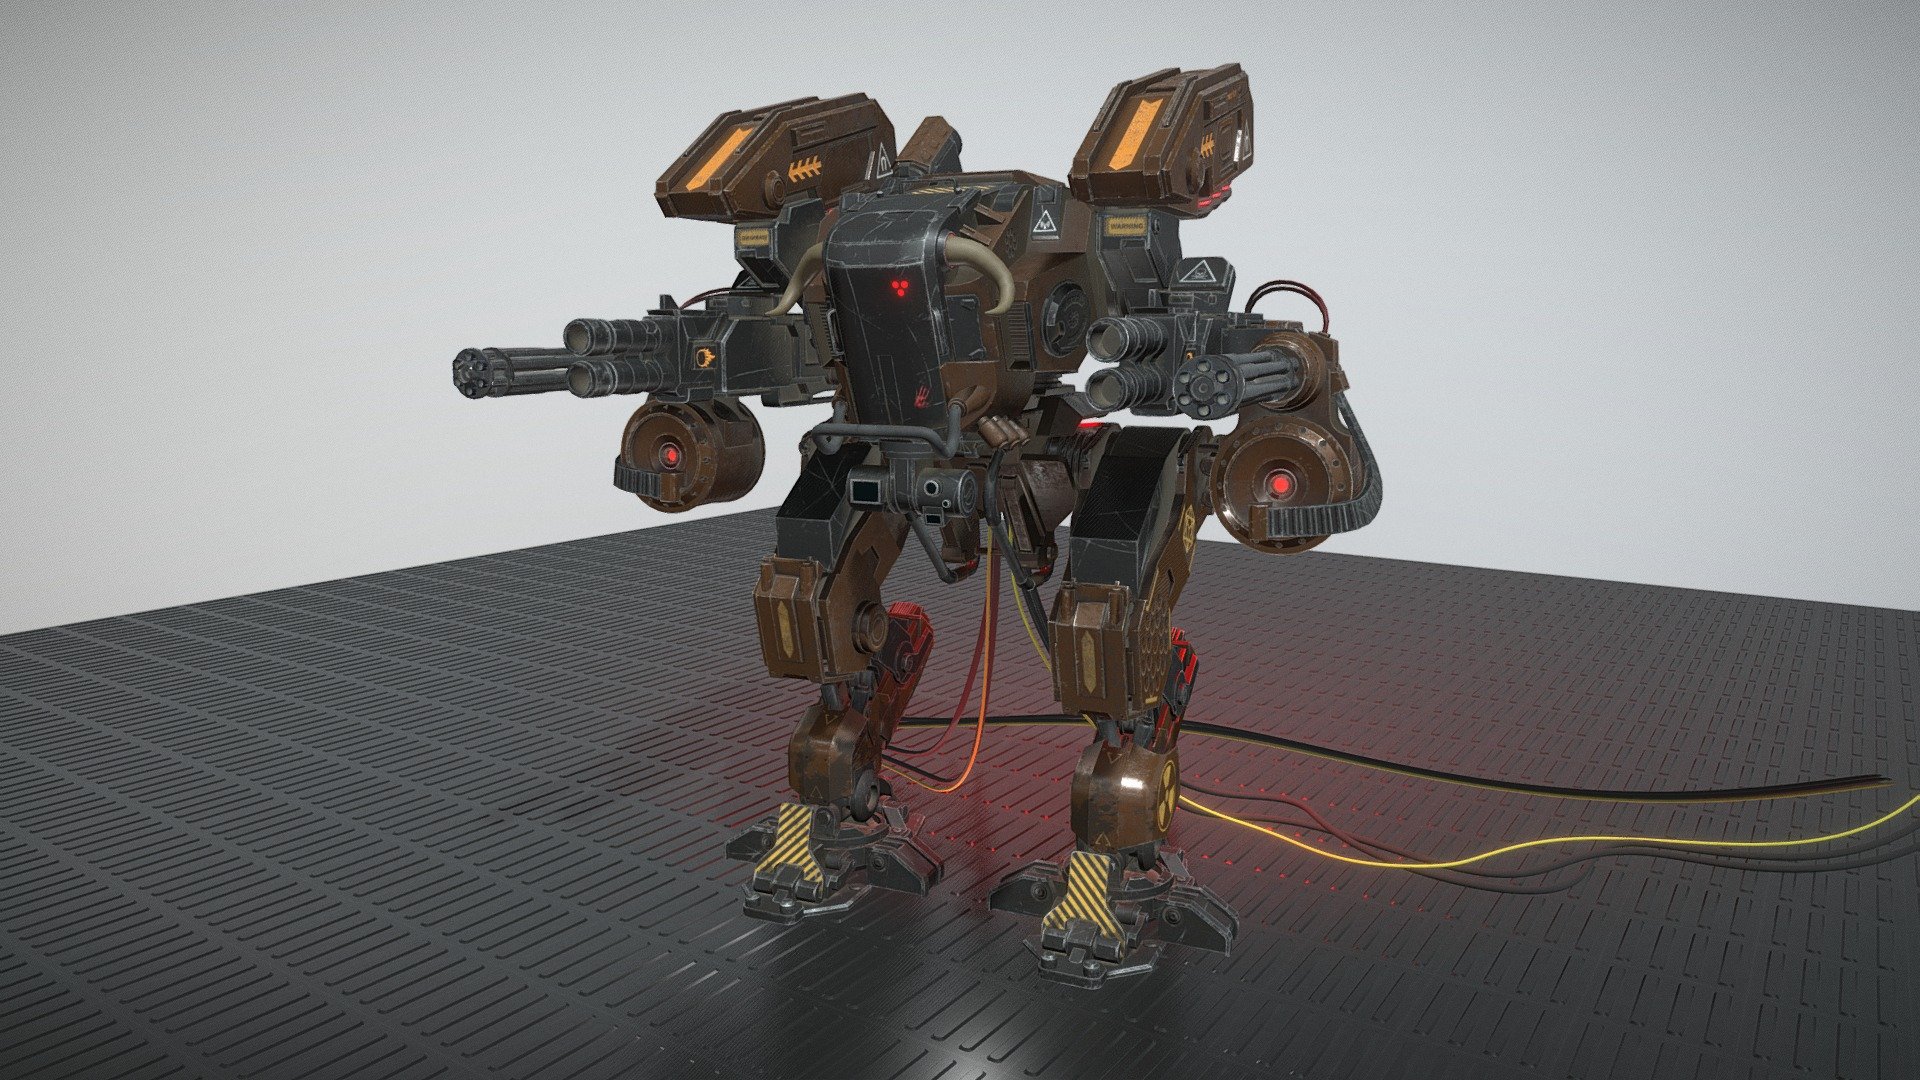 Combat robot
Serial number: AP2304-28
Height: 21.06 feet / 6.42 meters
Weight: 6.5 tons 
This prototype was created to destroy infantry and small and medium-sized vehicles - Robot-Bull - 3D model by propavel171092 3d model